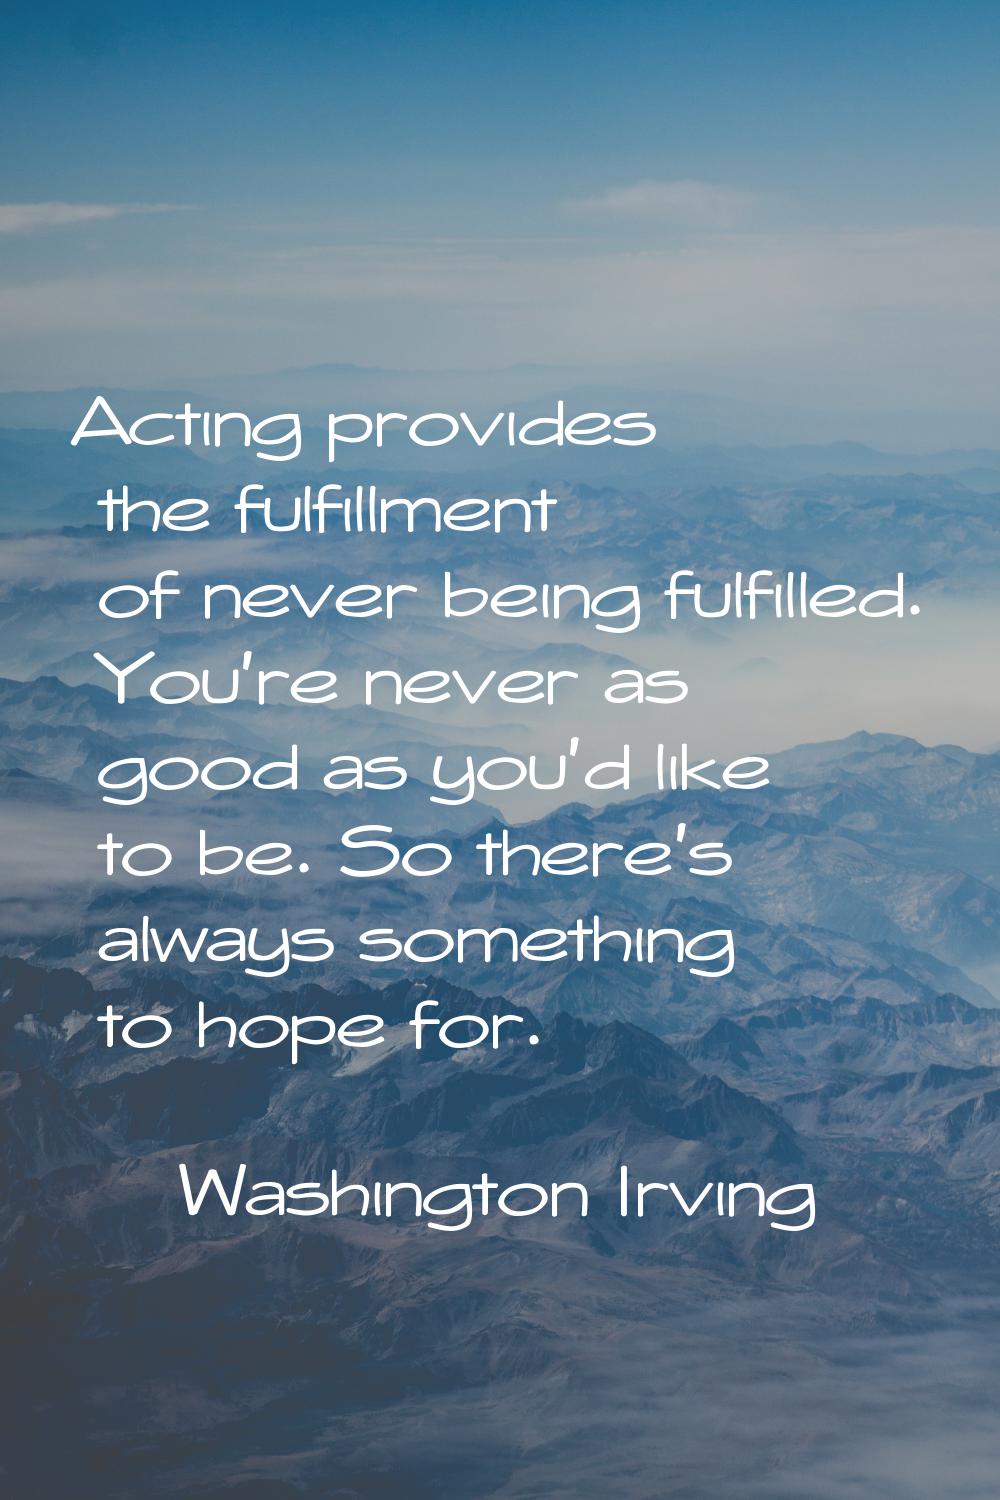 Acting provides the fulfillment of never being fulfilled. You're never as good as you'd like to be.